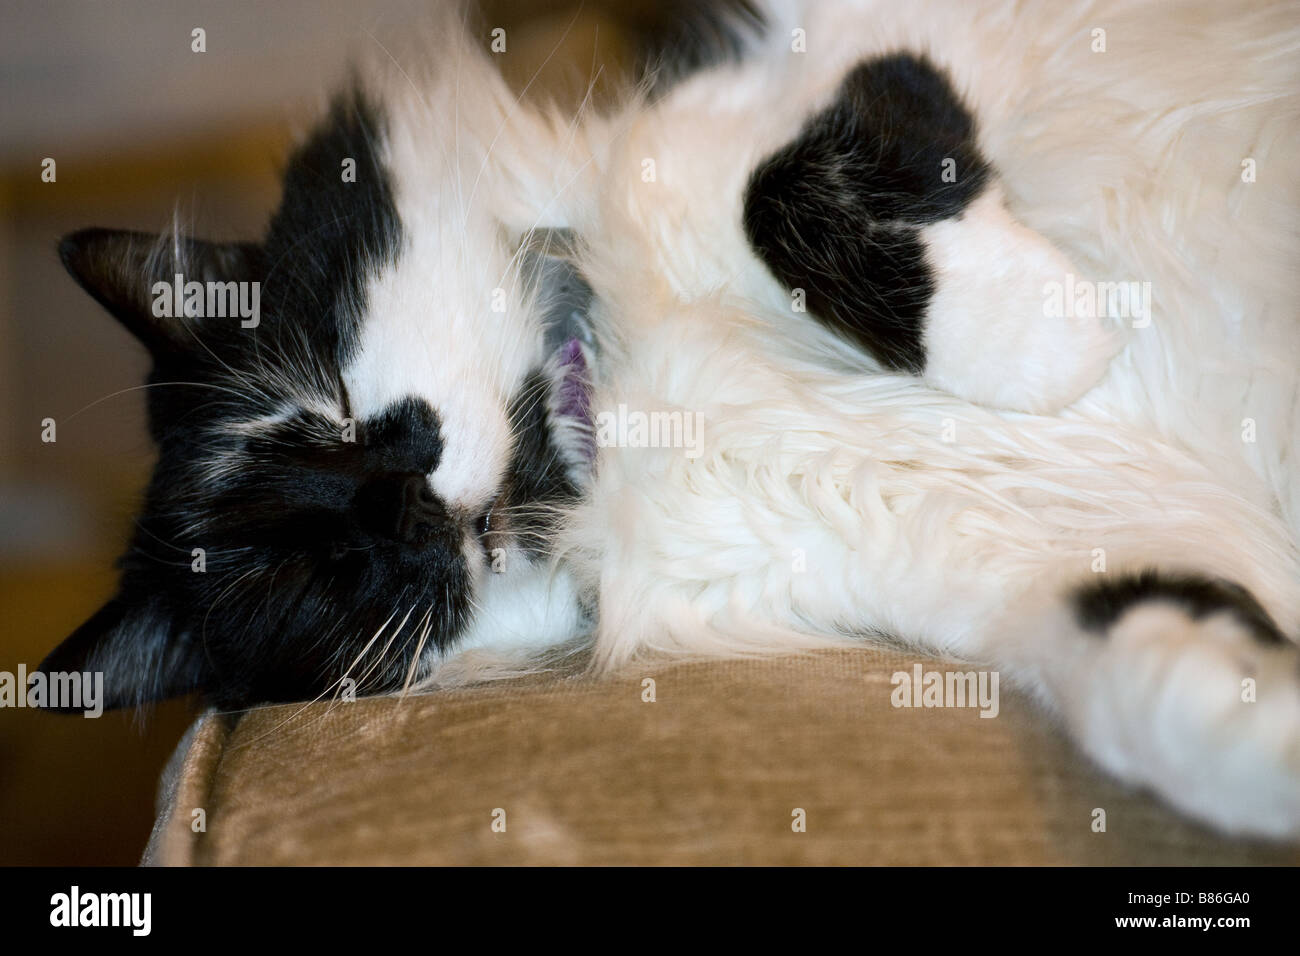 Black and White long haired cat asleep on sofa scrunching up face Stock Photo